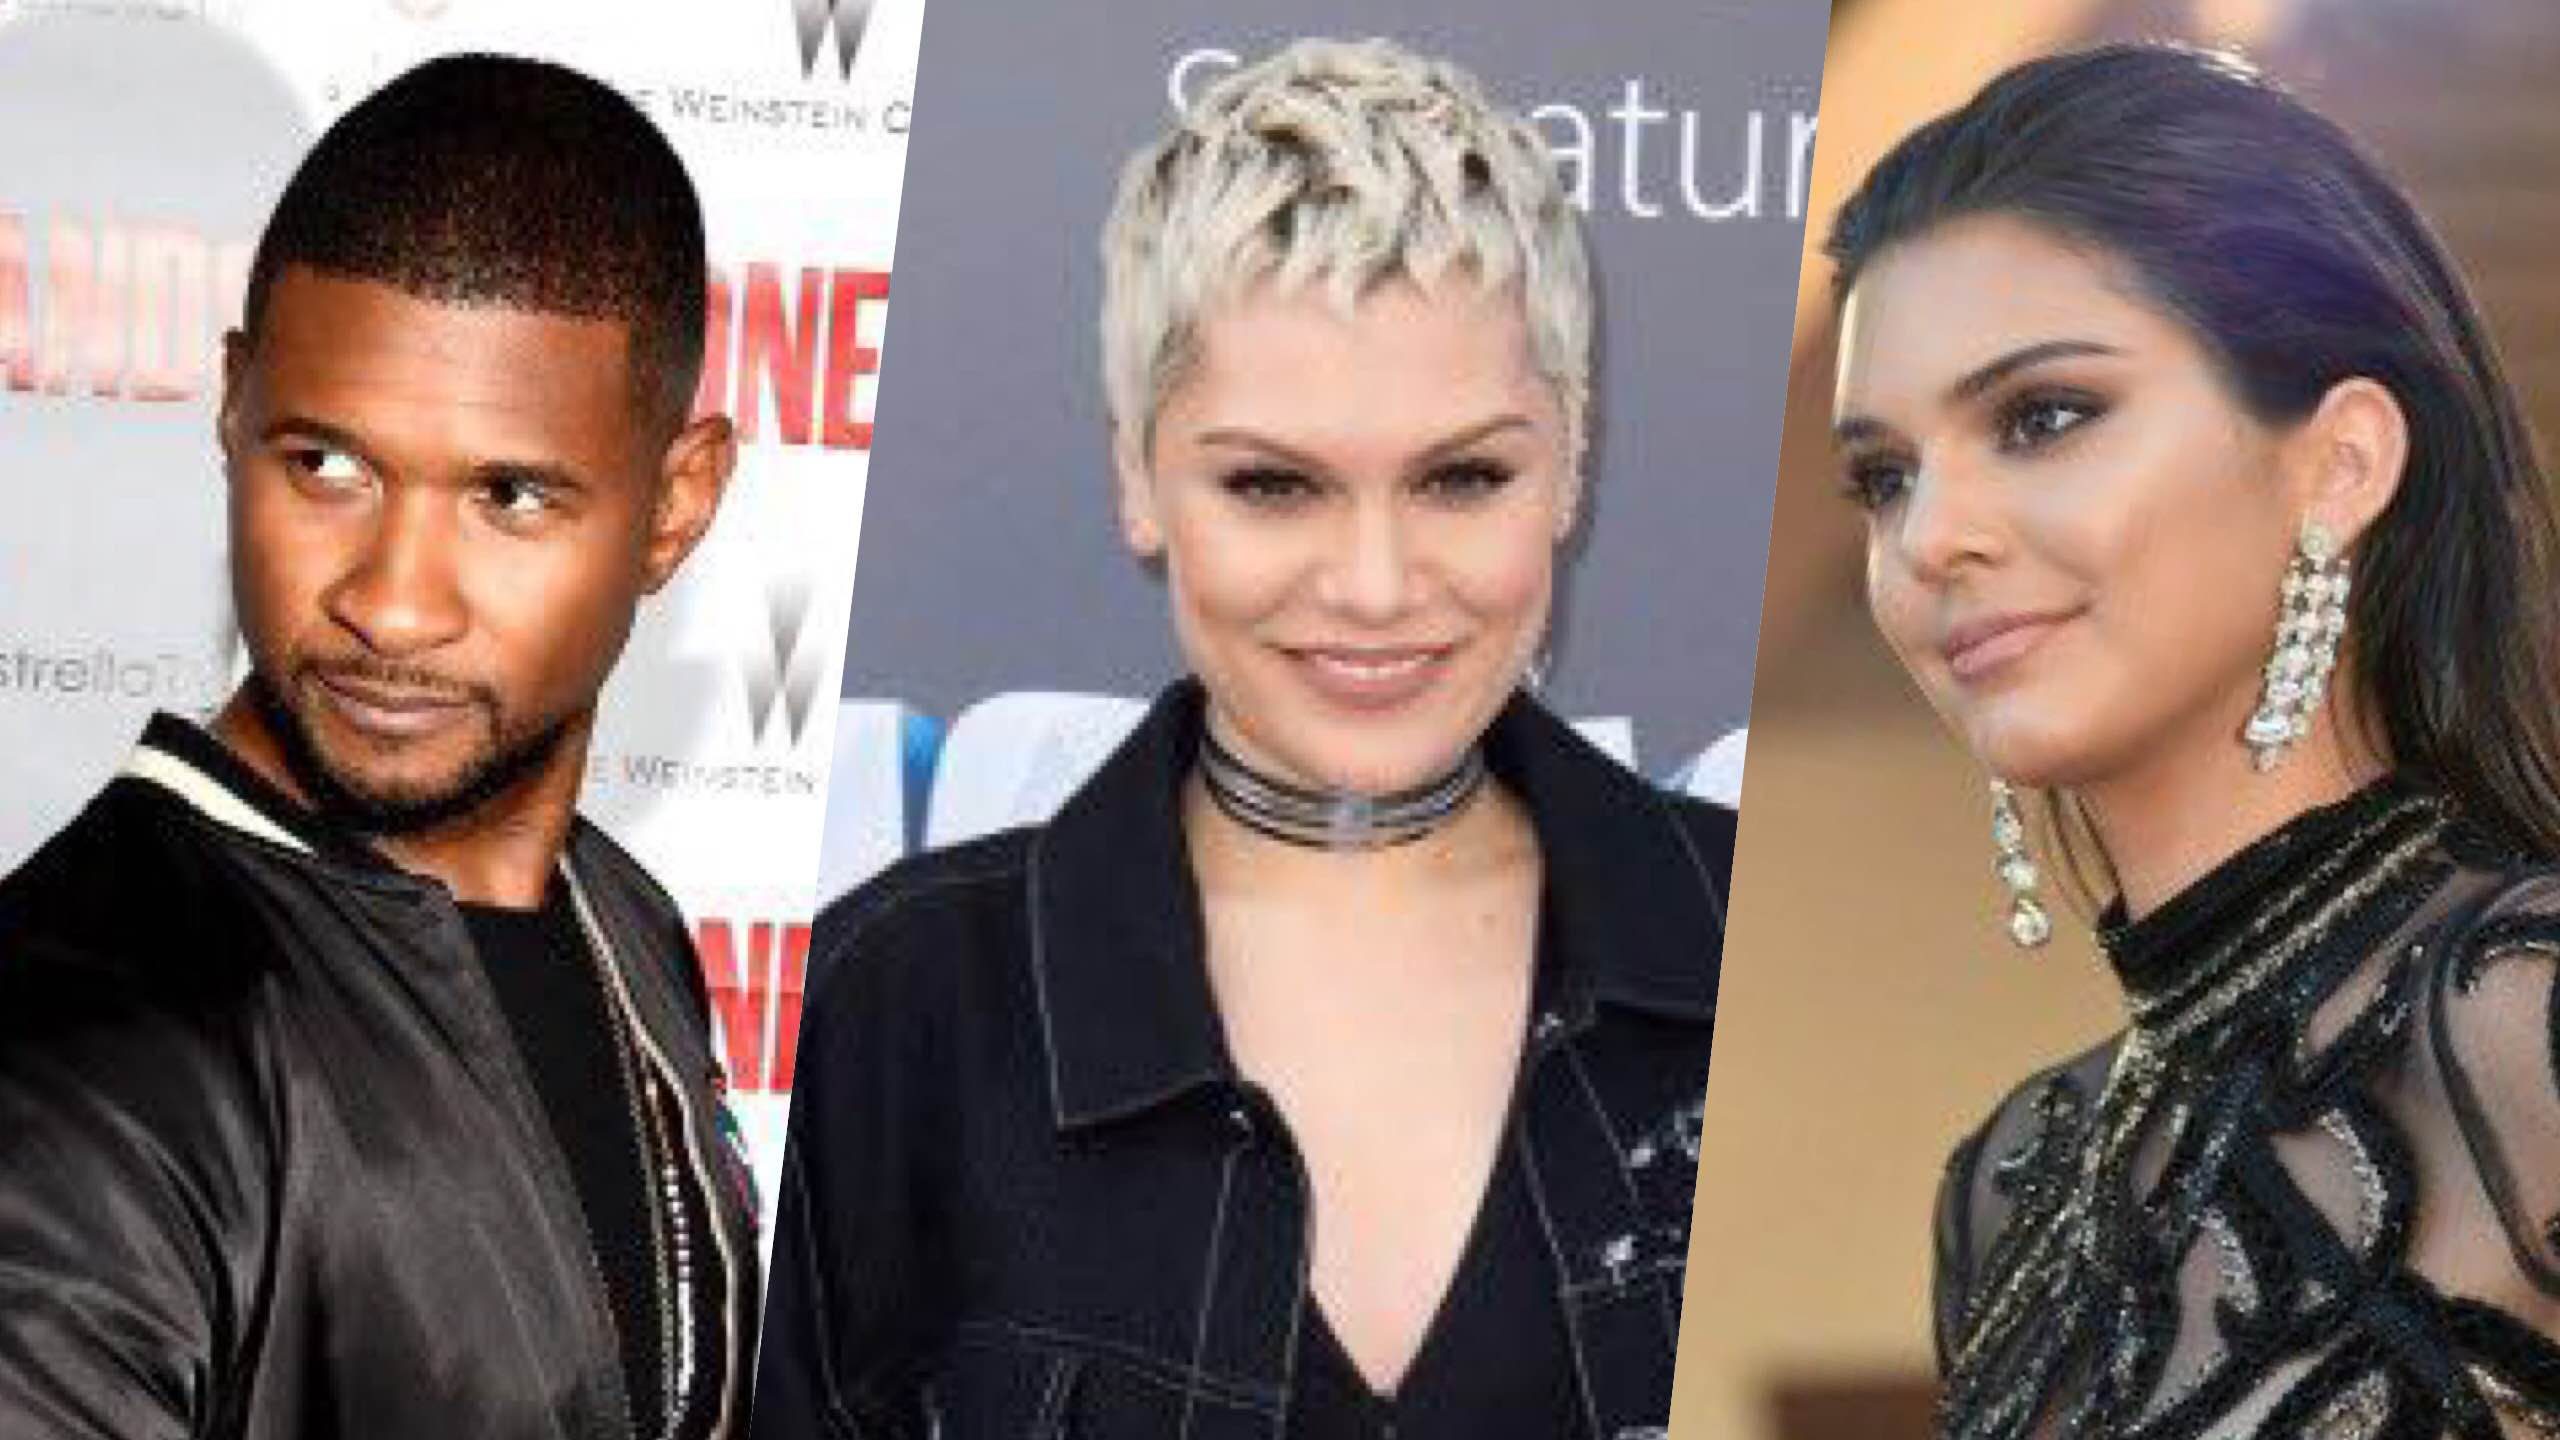 WHERE IS THE LOVE? Usher, Jessie, Kendall Jenner, and many more are featured in the Black Eyed Peas' remake of 'Where Is The Love?' Photos by Valerie Macon/Kevin Winter/Alberto Pizzoli/AFP/Getty Images North America 